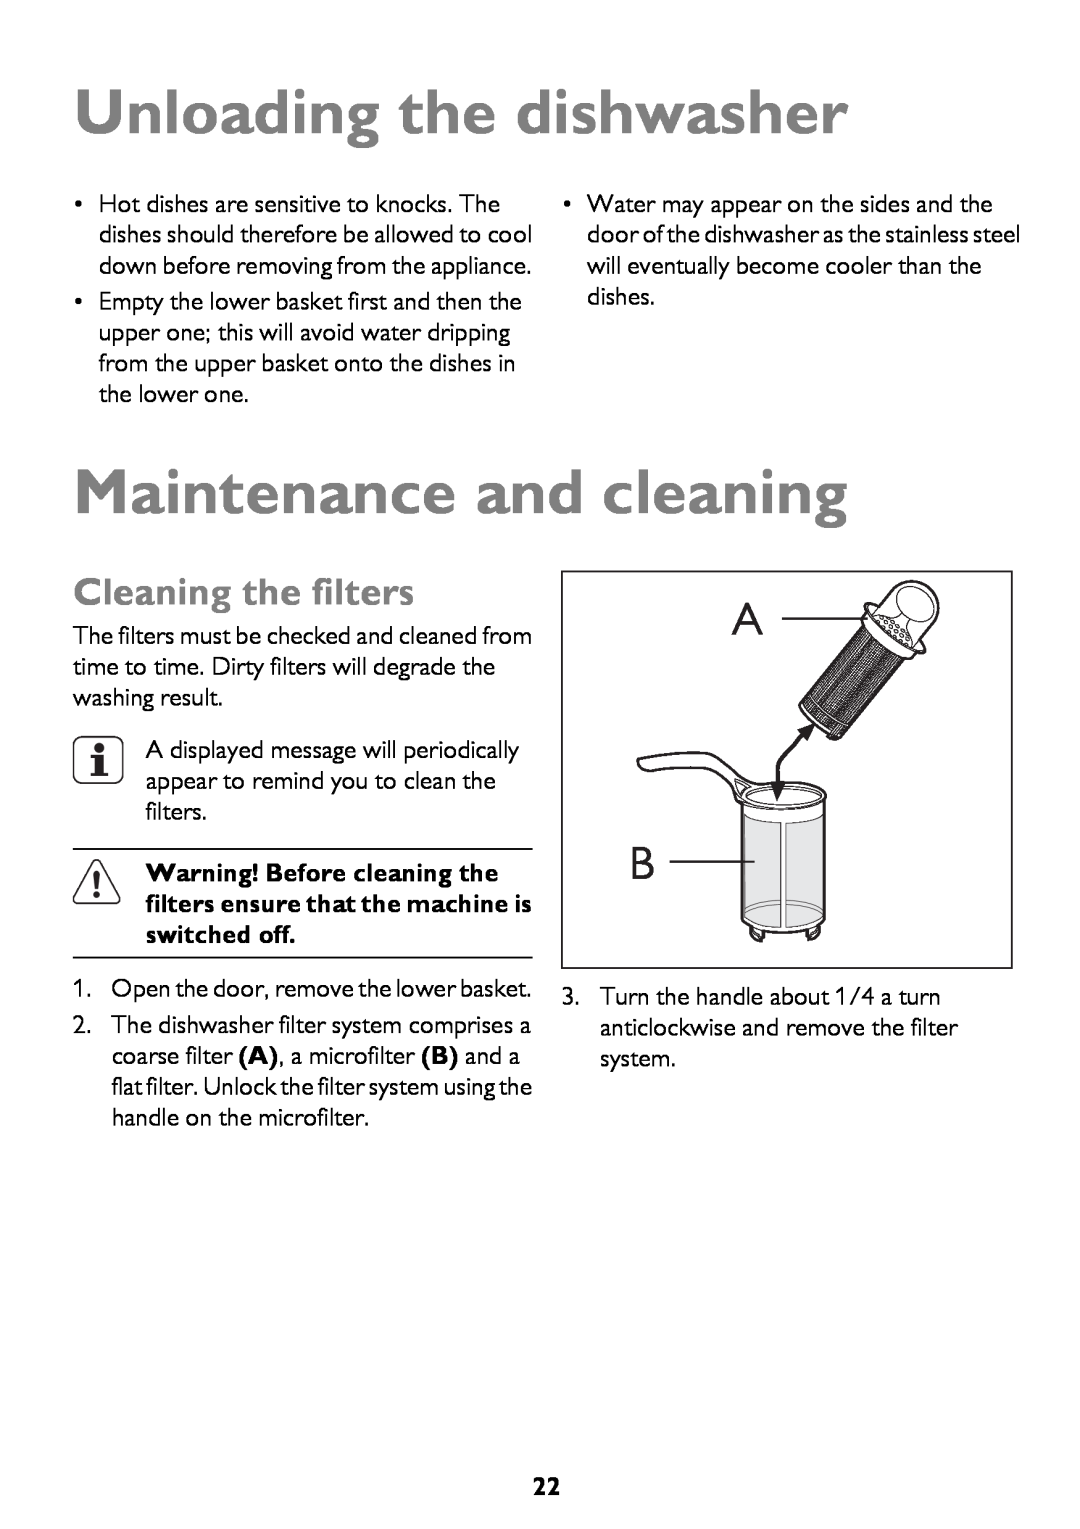 John Lewis JLDWW 1206 instruction manual Unloading the dishwasher, Maintenance and cleaning, Cleaning the filters 